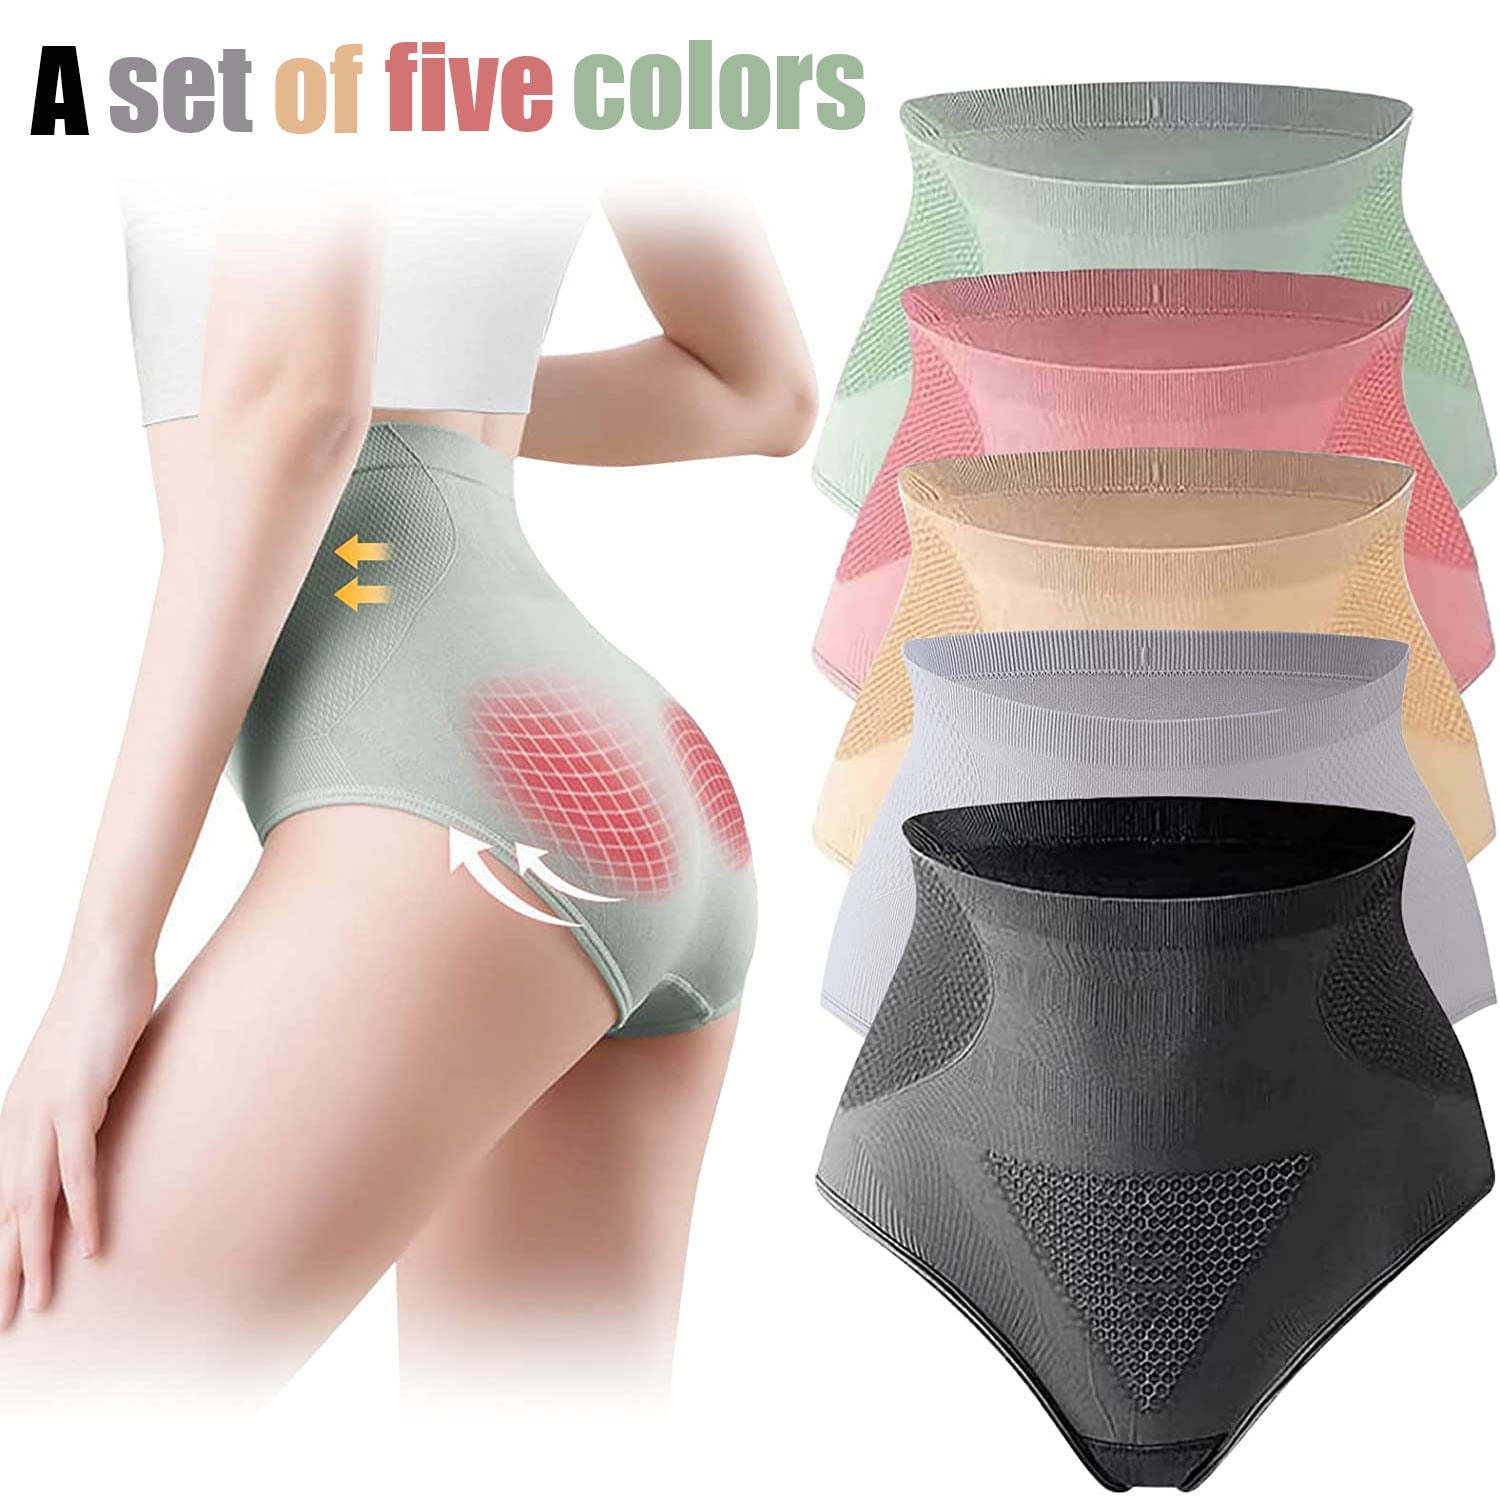 5PCS Graphene Honeycomb Vaginal Tightening & Body Shaping Briefs for Women  High Waisted Underwear Tummy Control Panties 